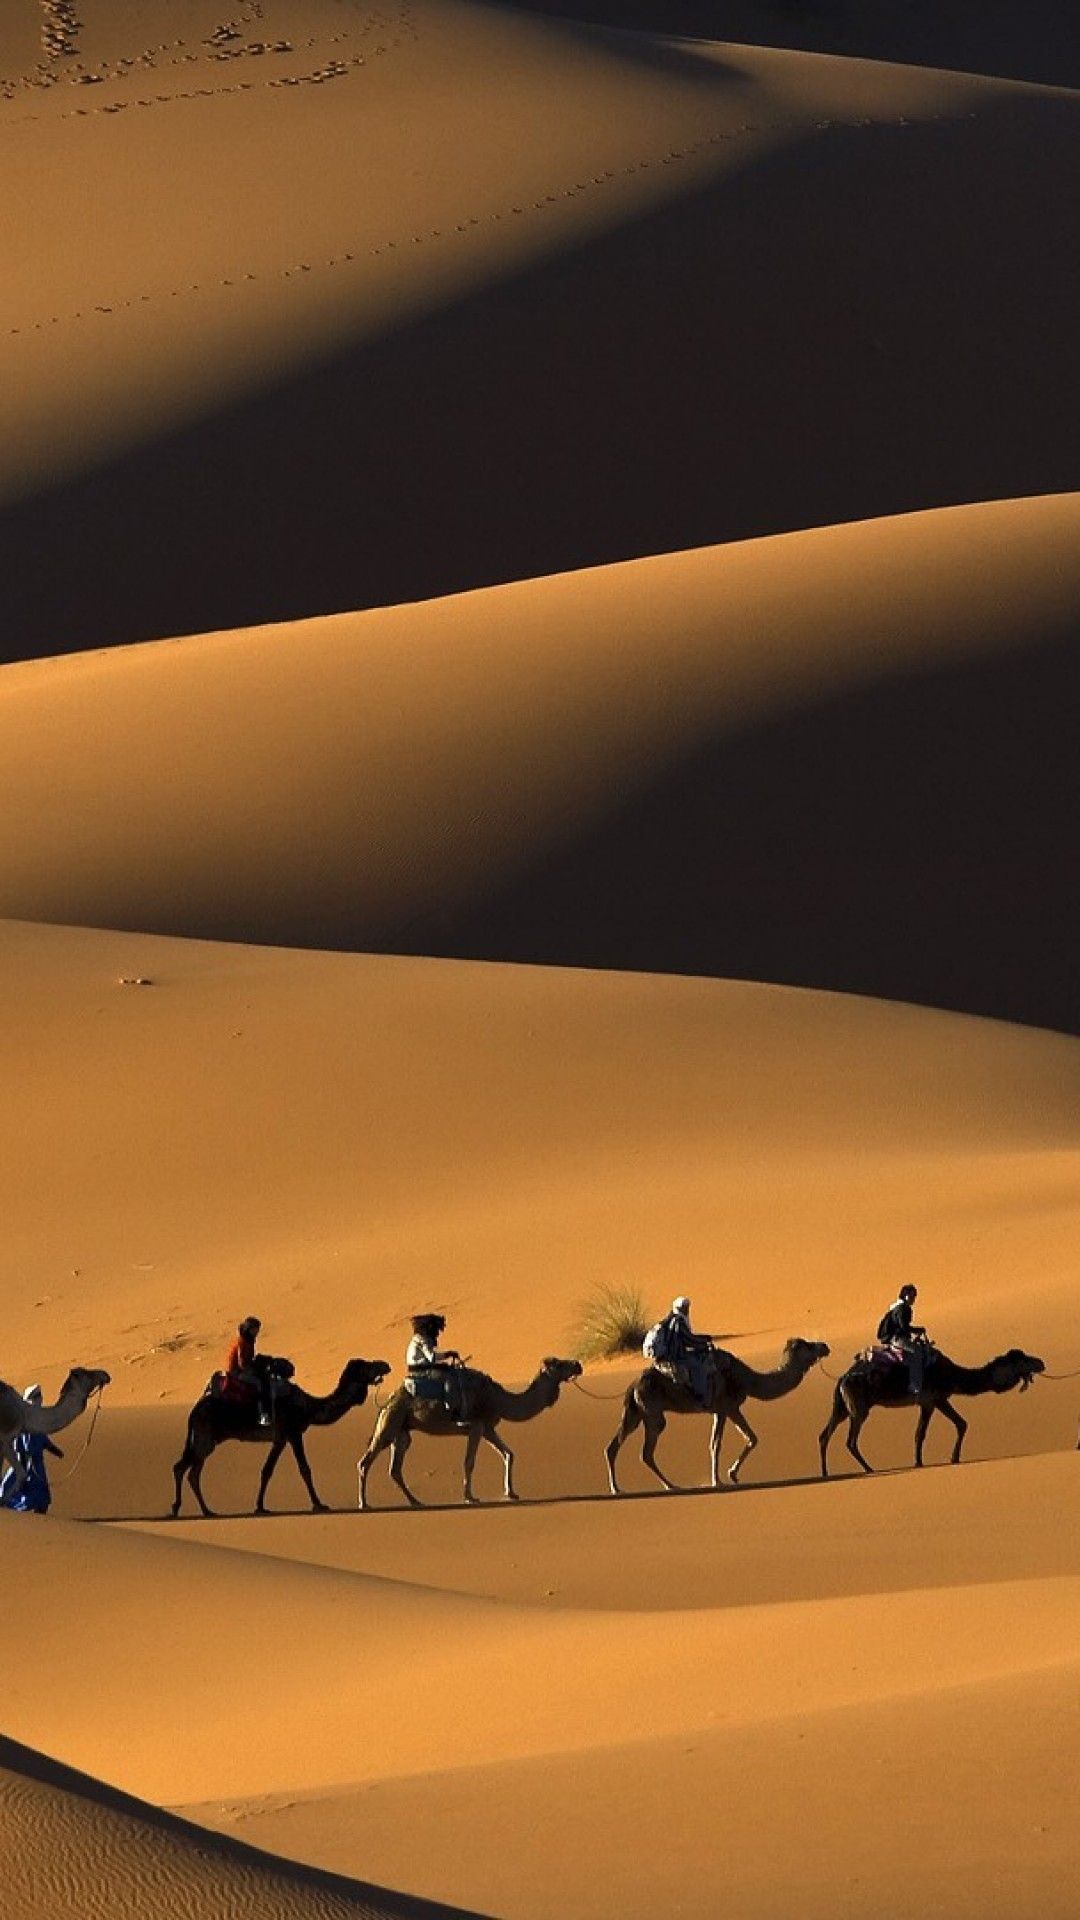 A Caravan Of Camels In The Desert Photo